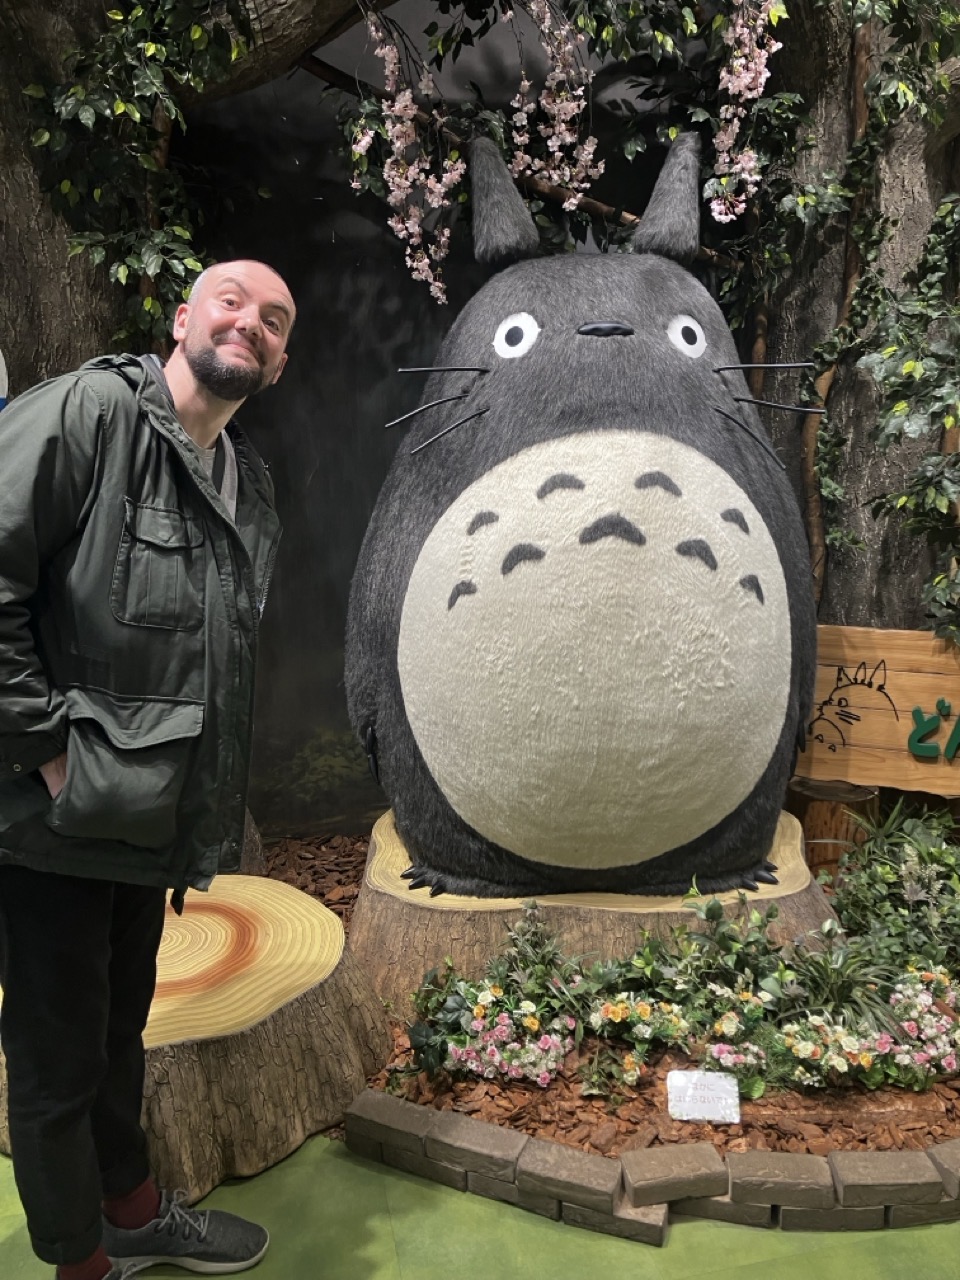 Me and a big Totoro